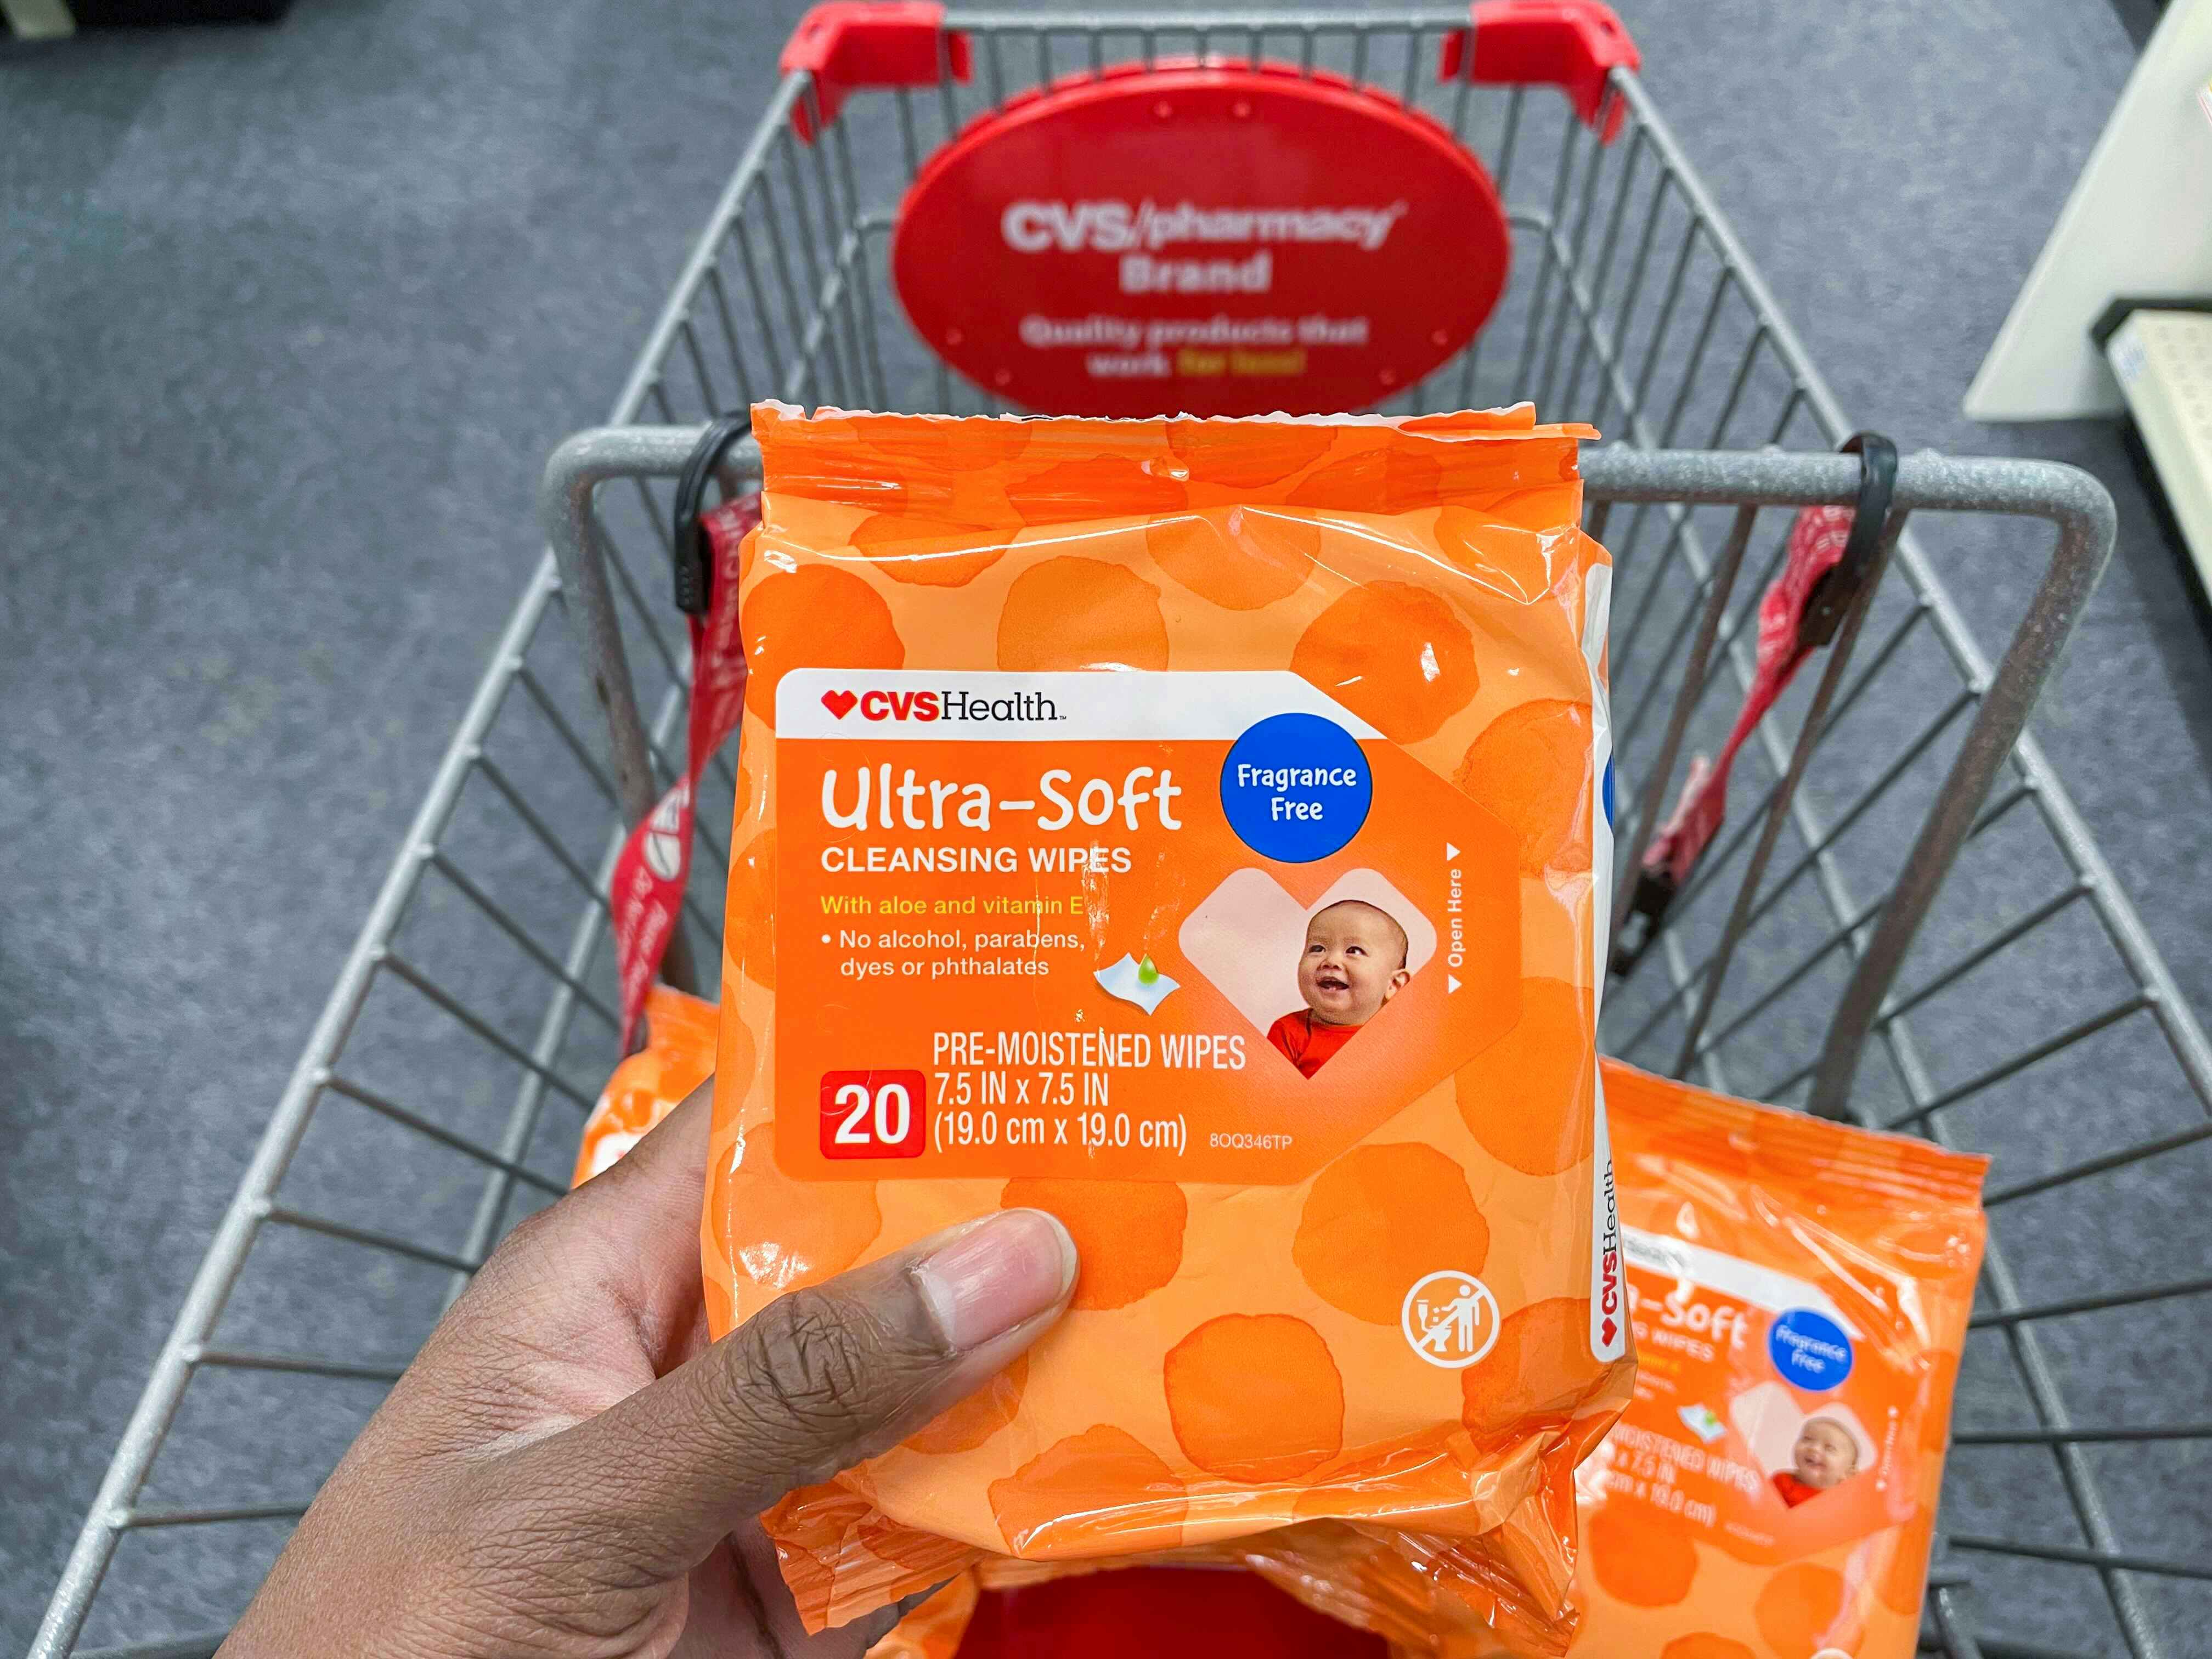 A person's hand holding some CVS health baby wipes in front of a CVS cart.